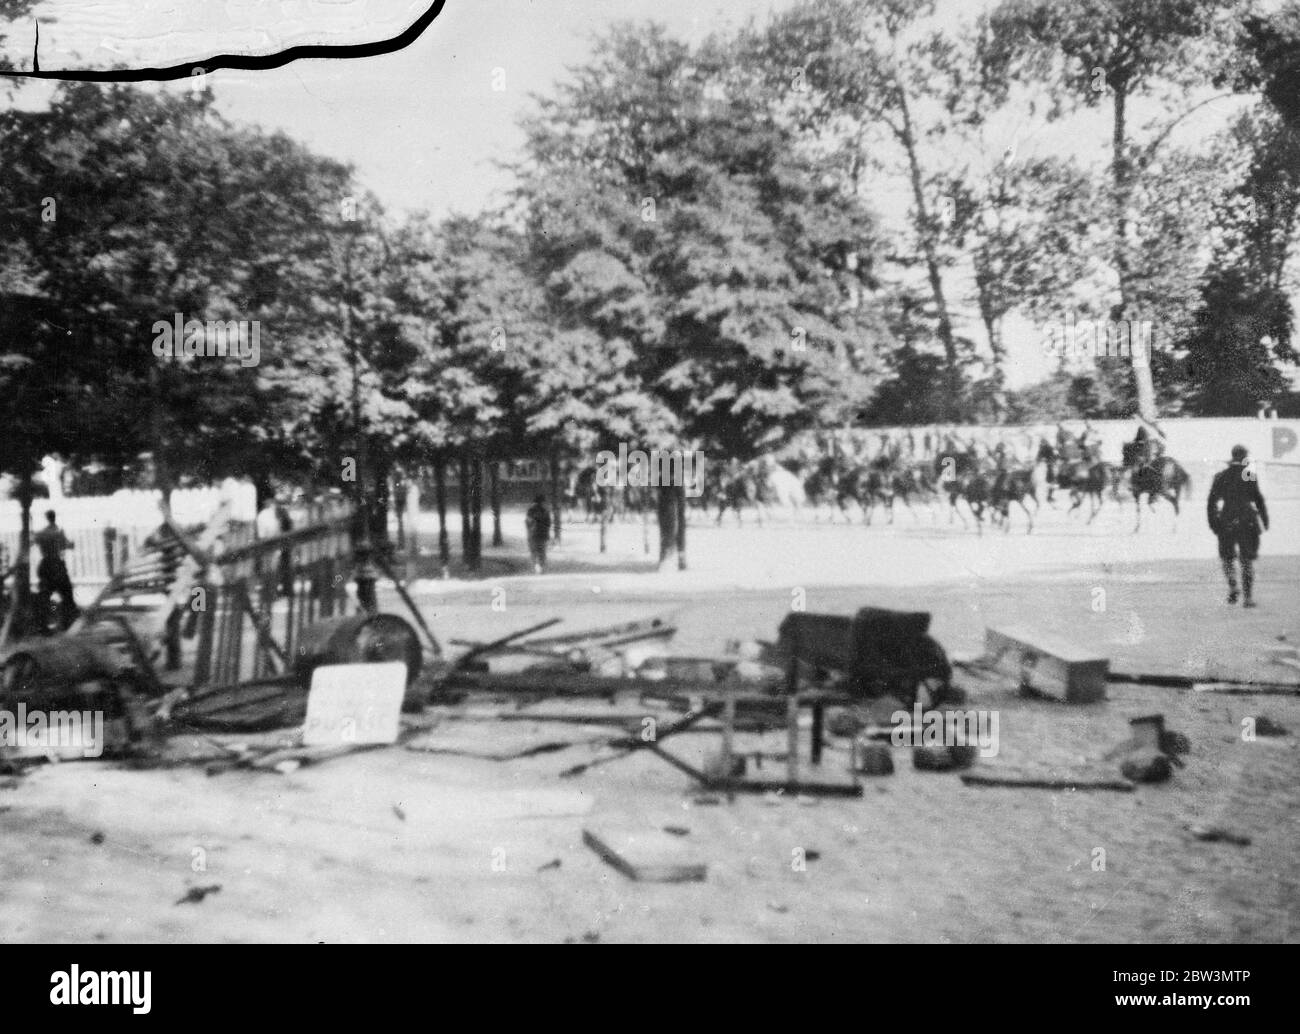 Brest rioters tear up paving stones as missles against police and troops . RIosters in Brest shipping strike caused through the French Goverment ' s econmy cuts . Photo shows French mounted troops pursuing rioters after capturing their barricade ( in foreground ) in the avenue Clemences , Brest . 8 August 1935 Stock Photo